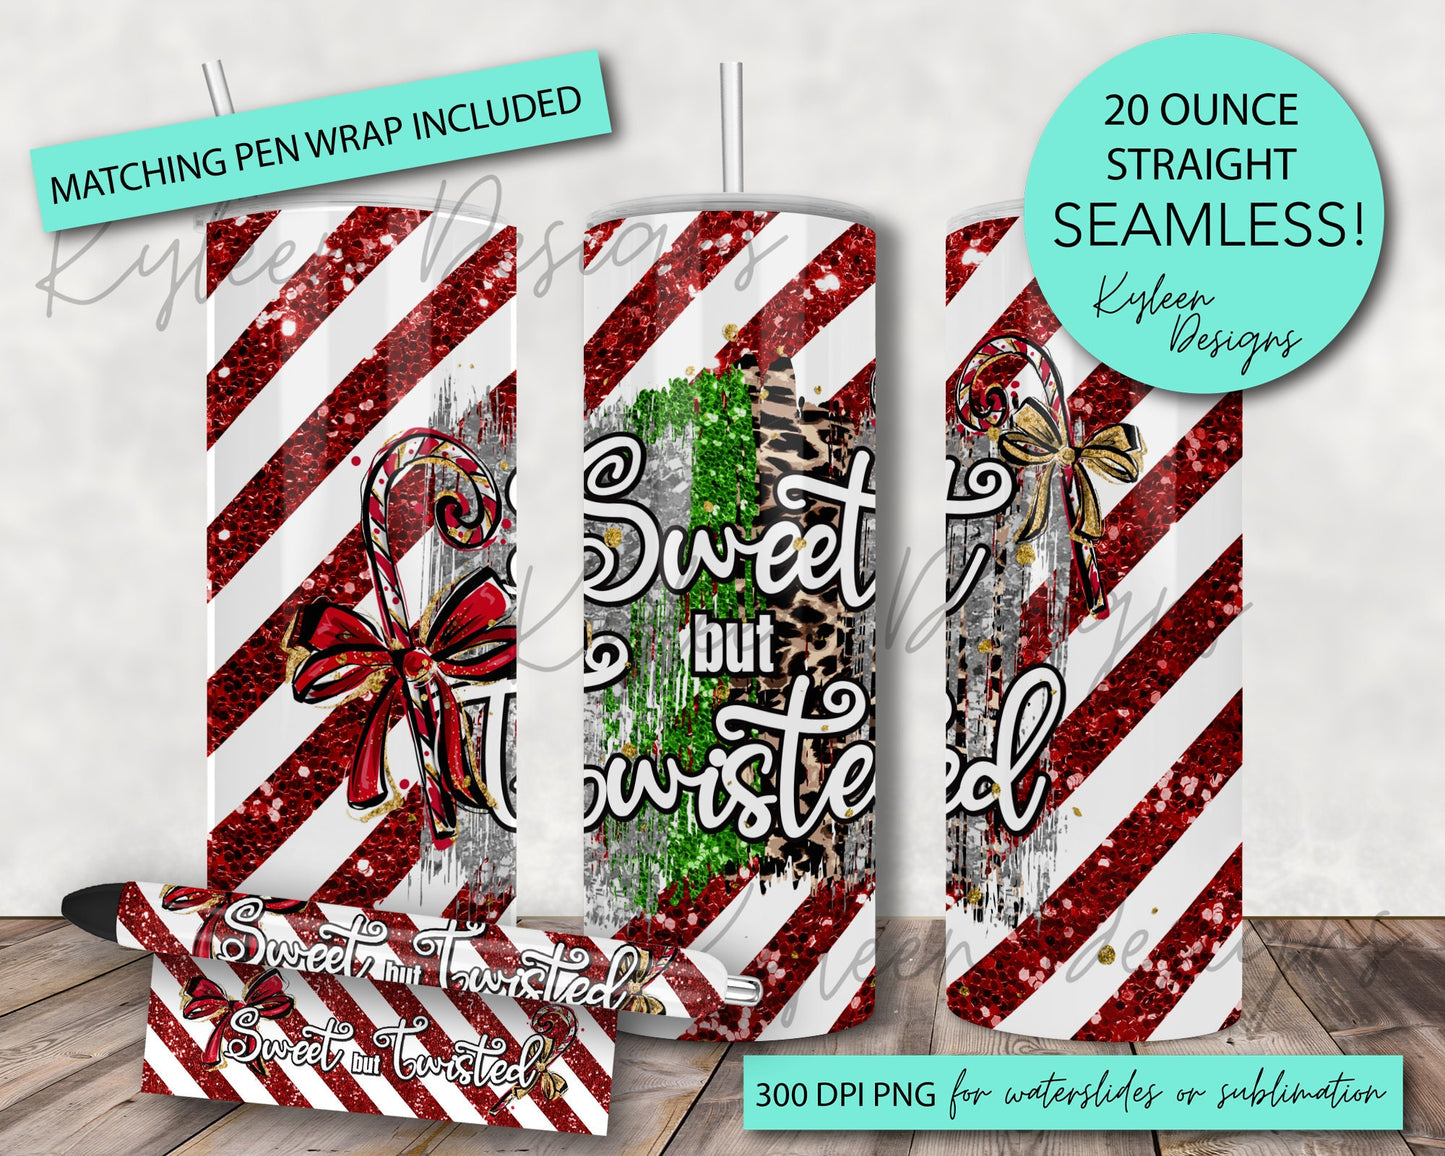 Sweet But Twisted 20 oz Tumbler Wrap and Pen Set  For Waterslides, Sublimation or Vinyl High res PNG digital file- Straight only SEAMLESS